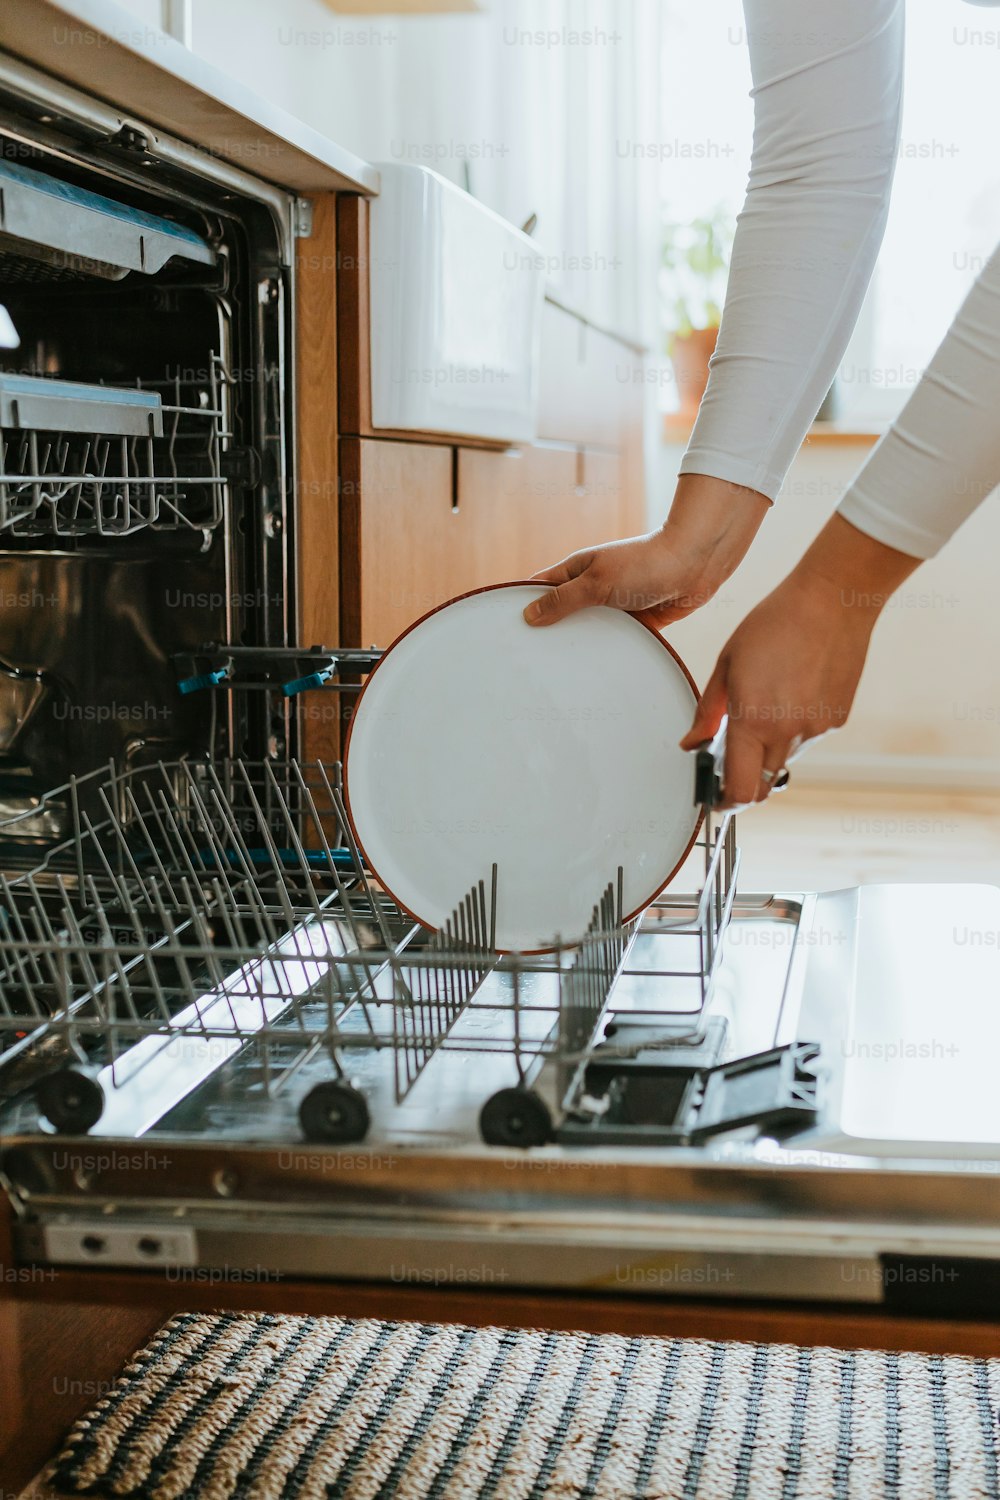 a woman is putting a dish in the dishwasher